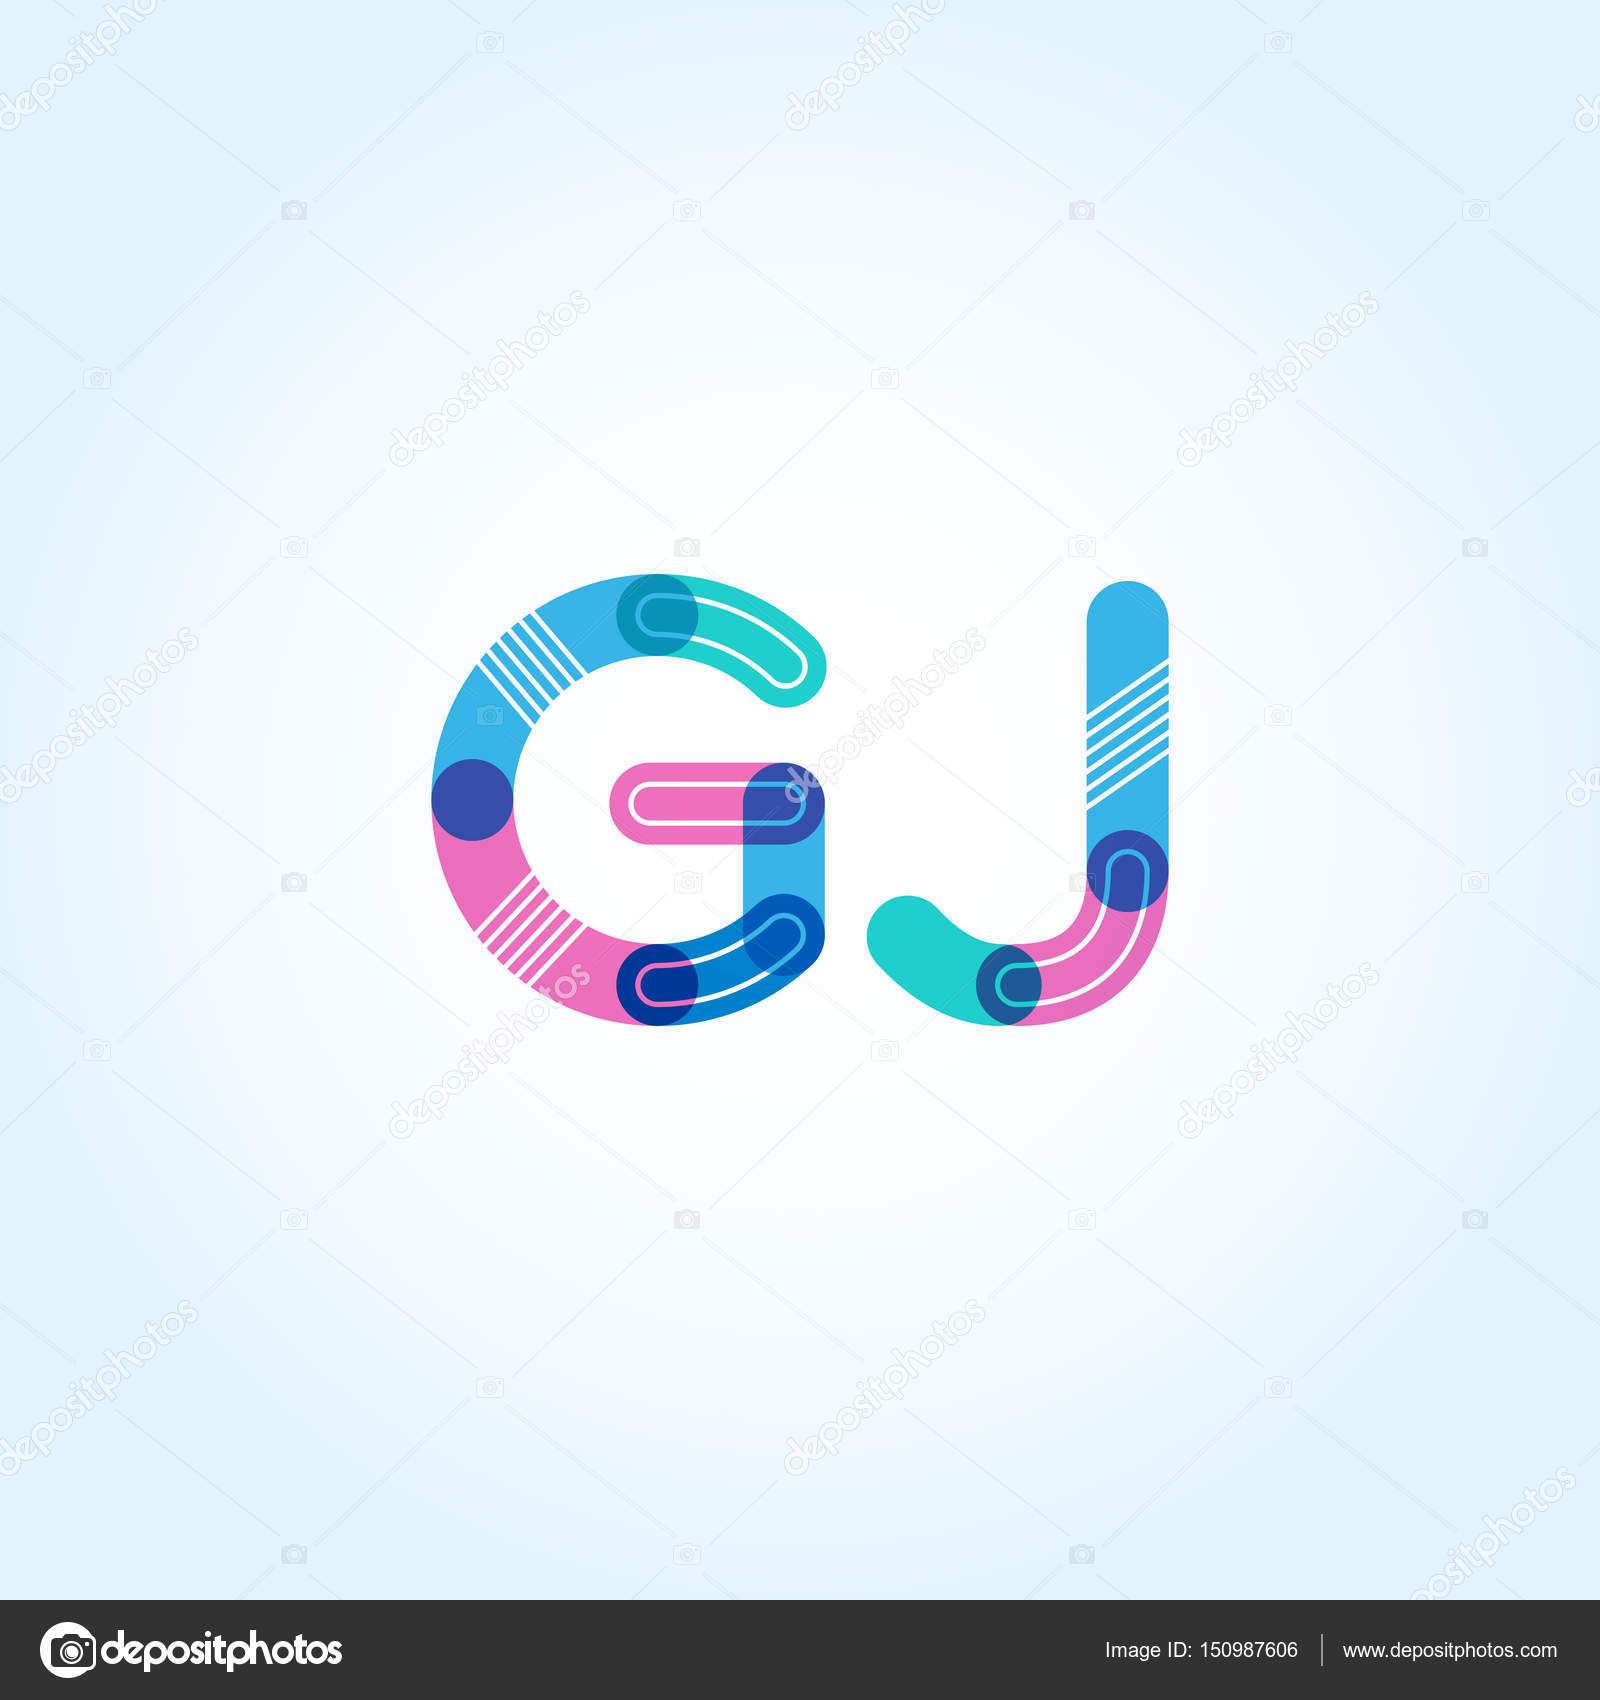 Gj Connected Letters Logo Vector Image By C Brainbistro Vector Stock